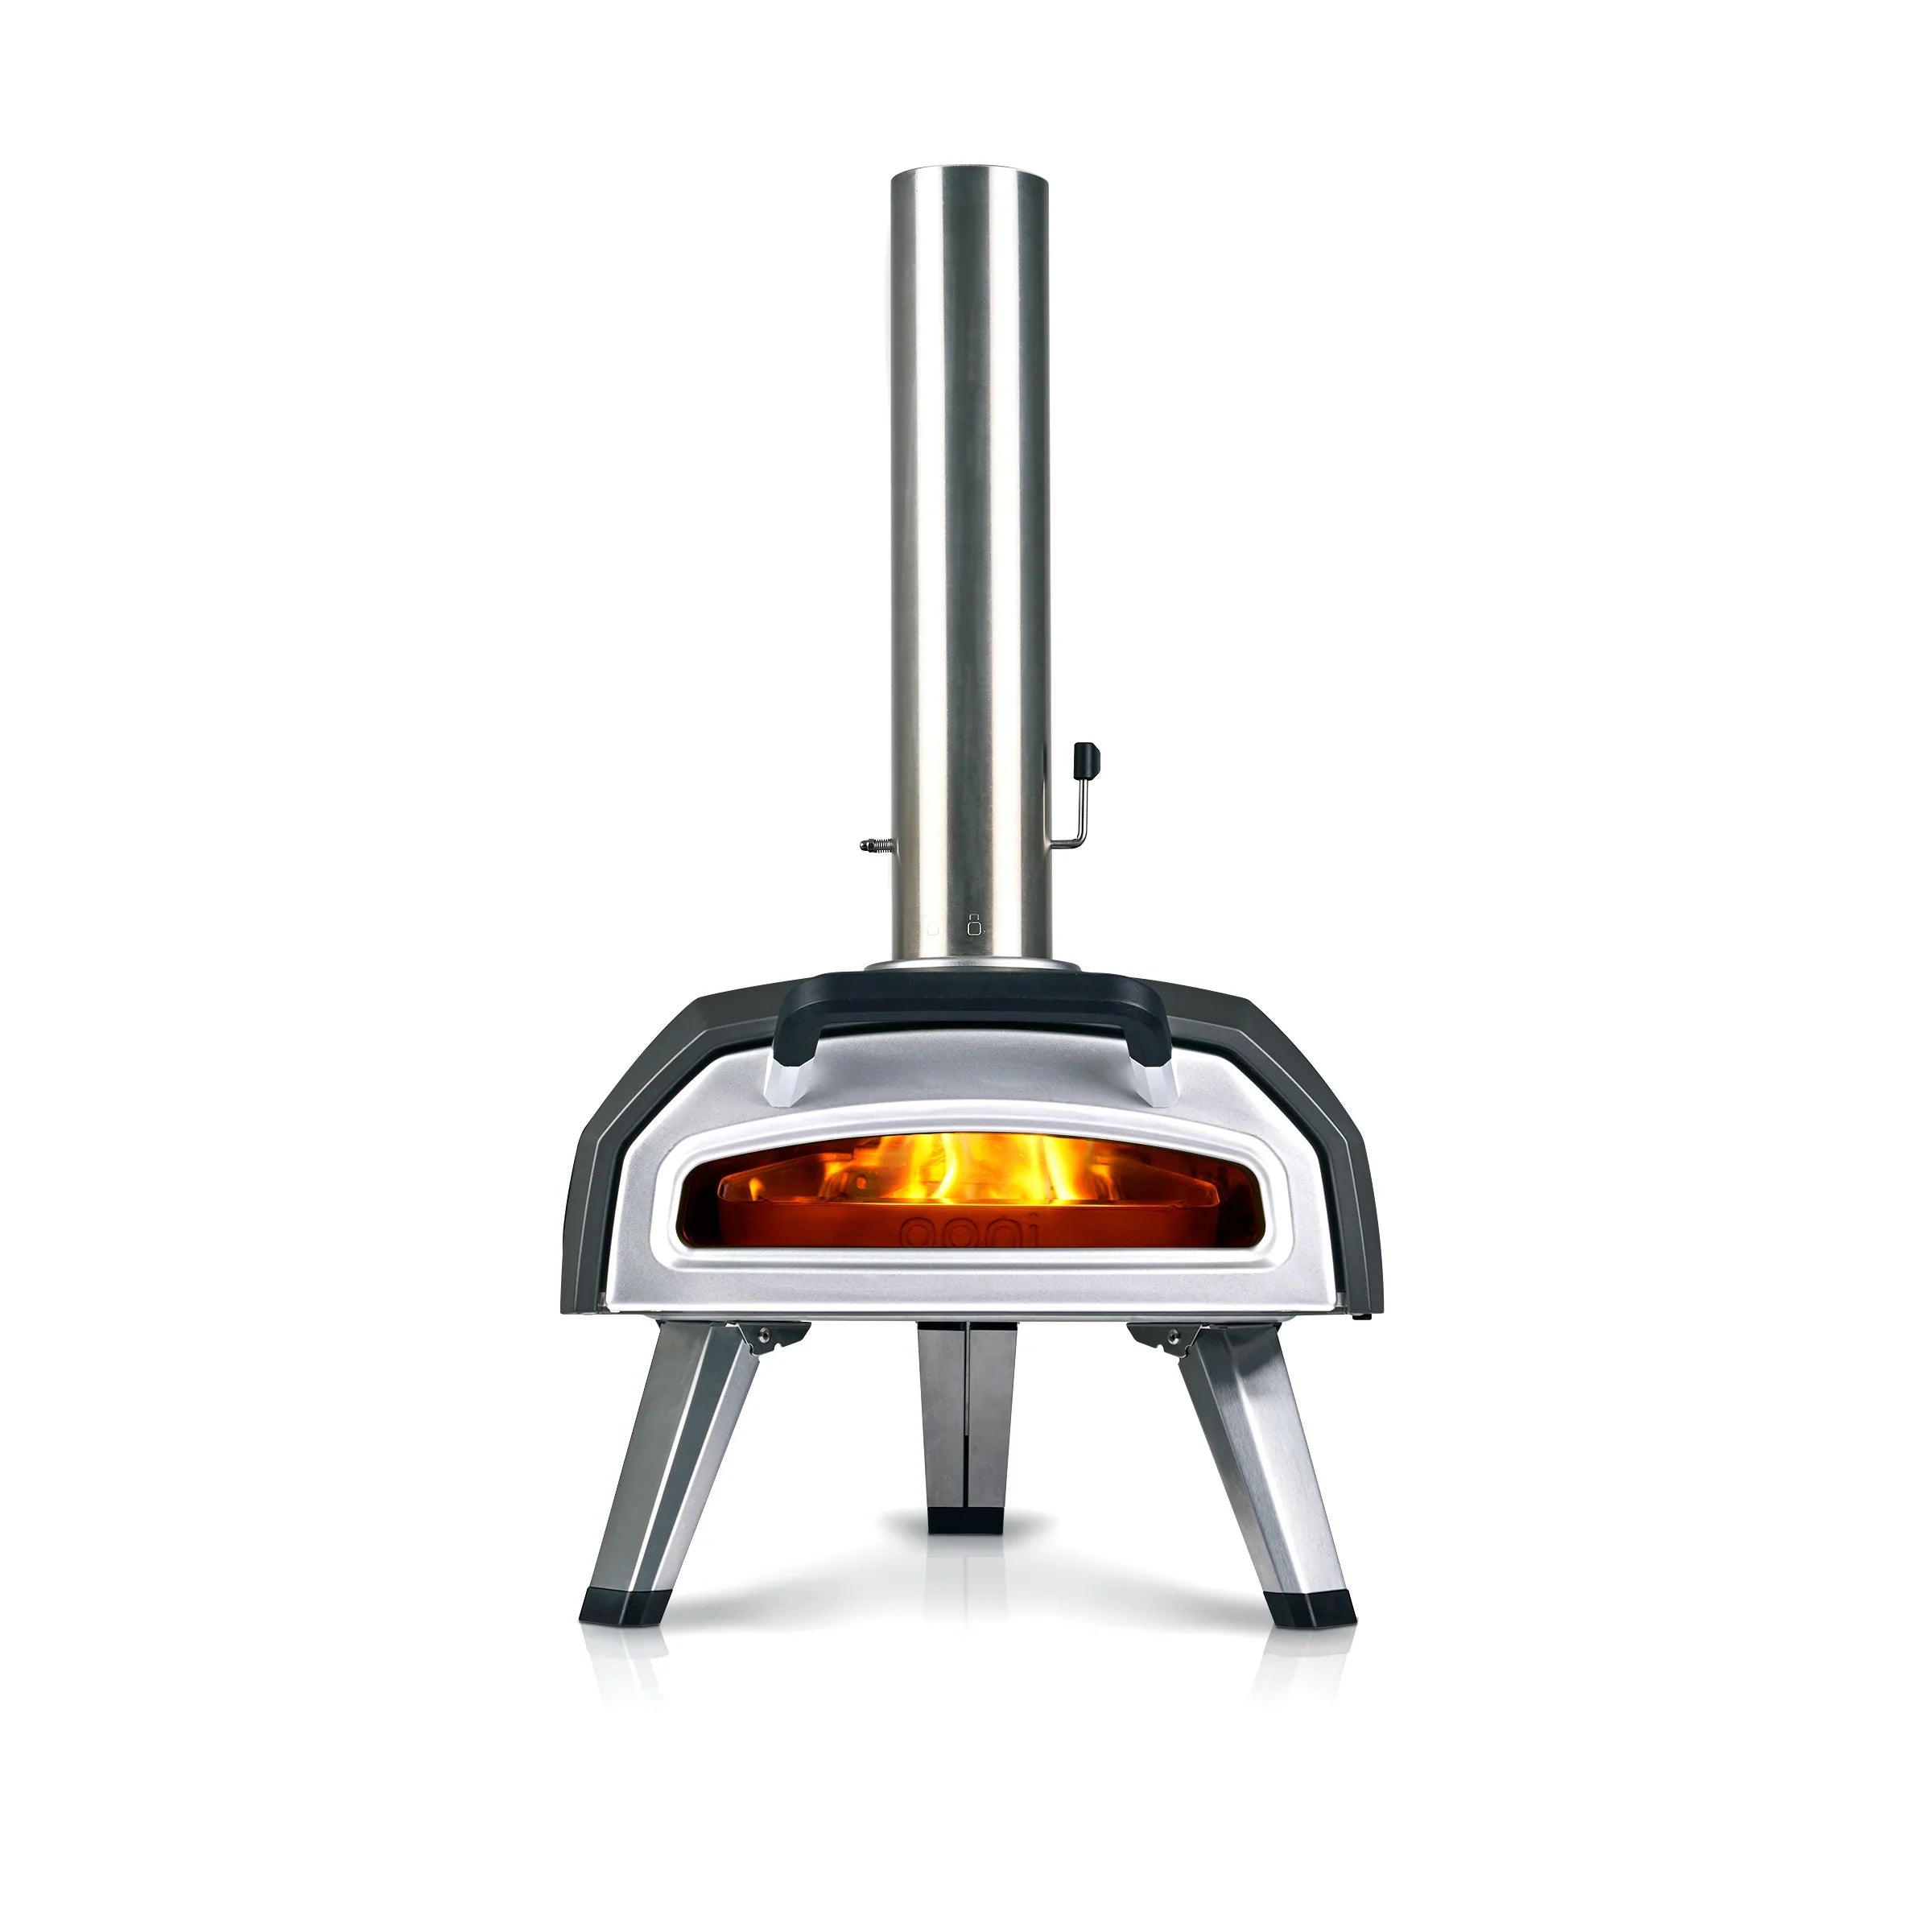 Ooni Volt 12 Review: The most flexible pizza oven